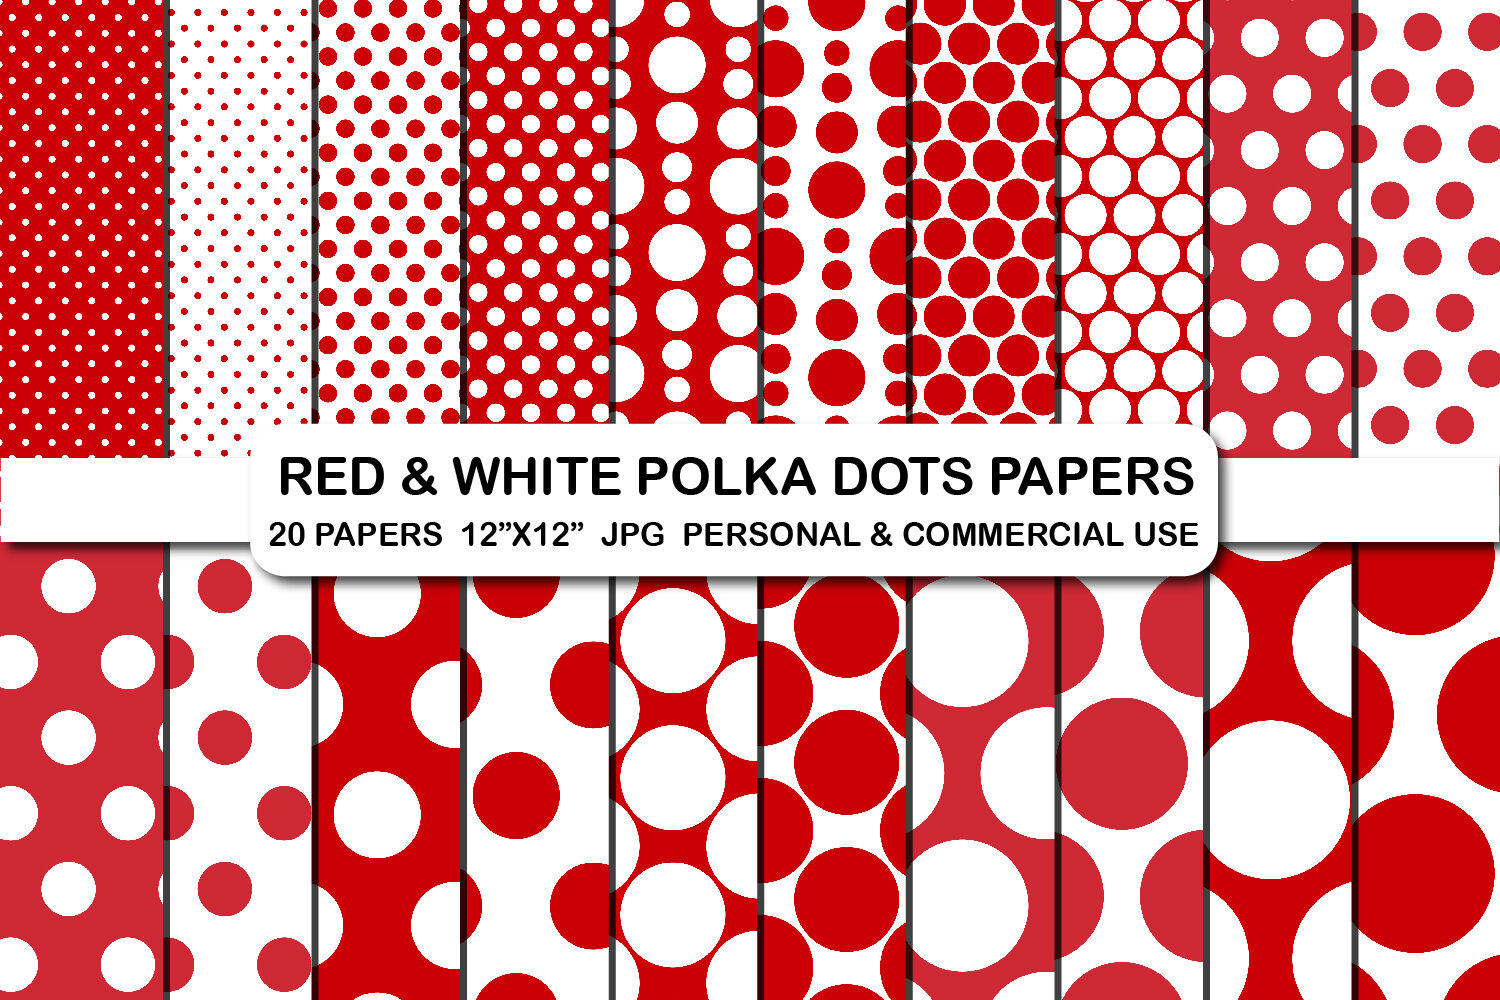 Background,polka dots,red,white,red polka dots - free image from